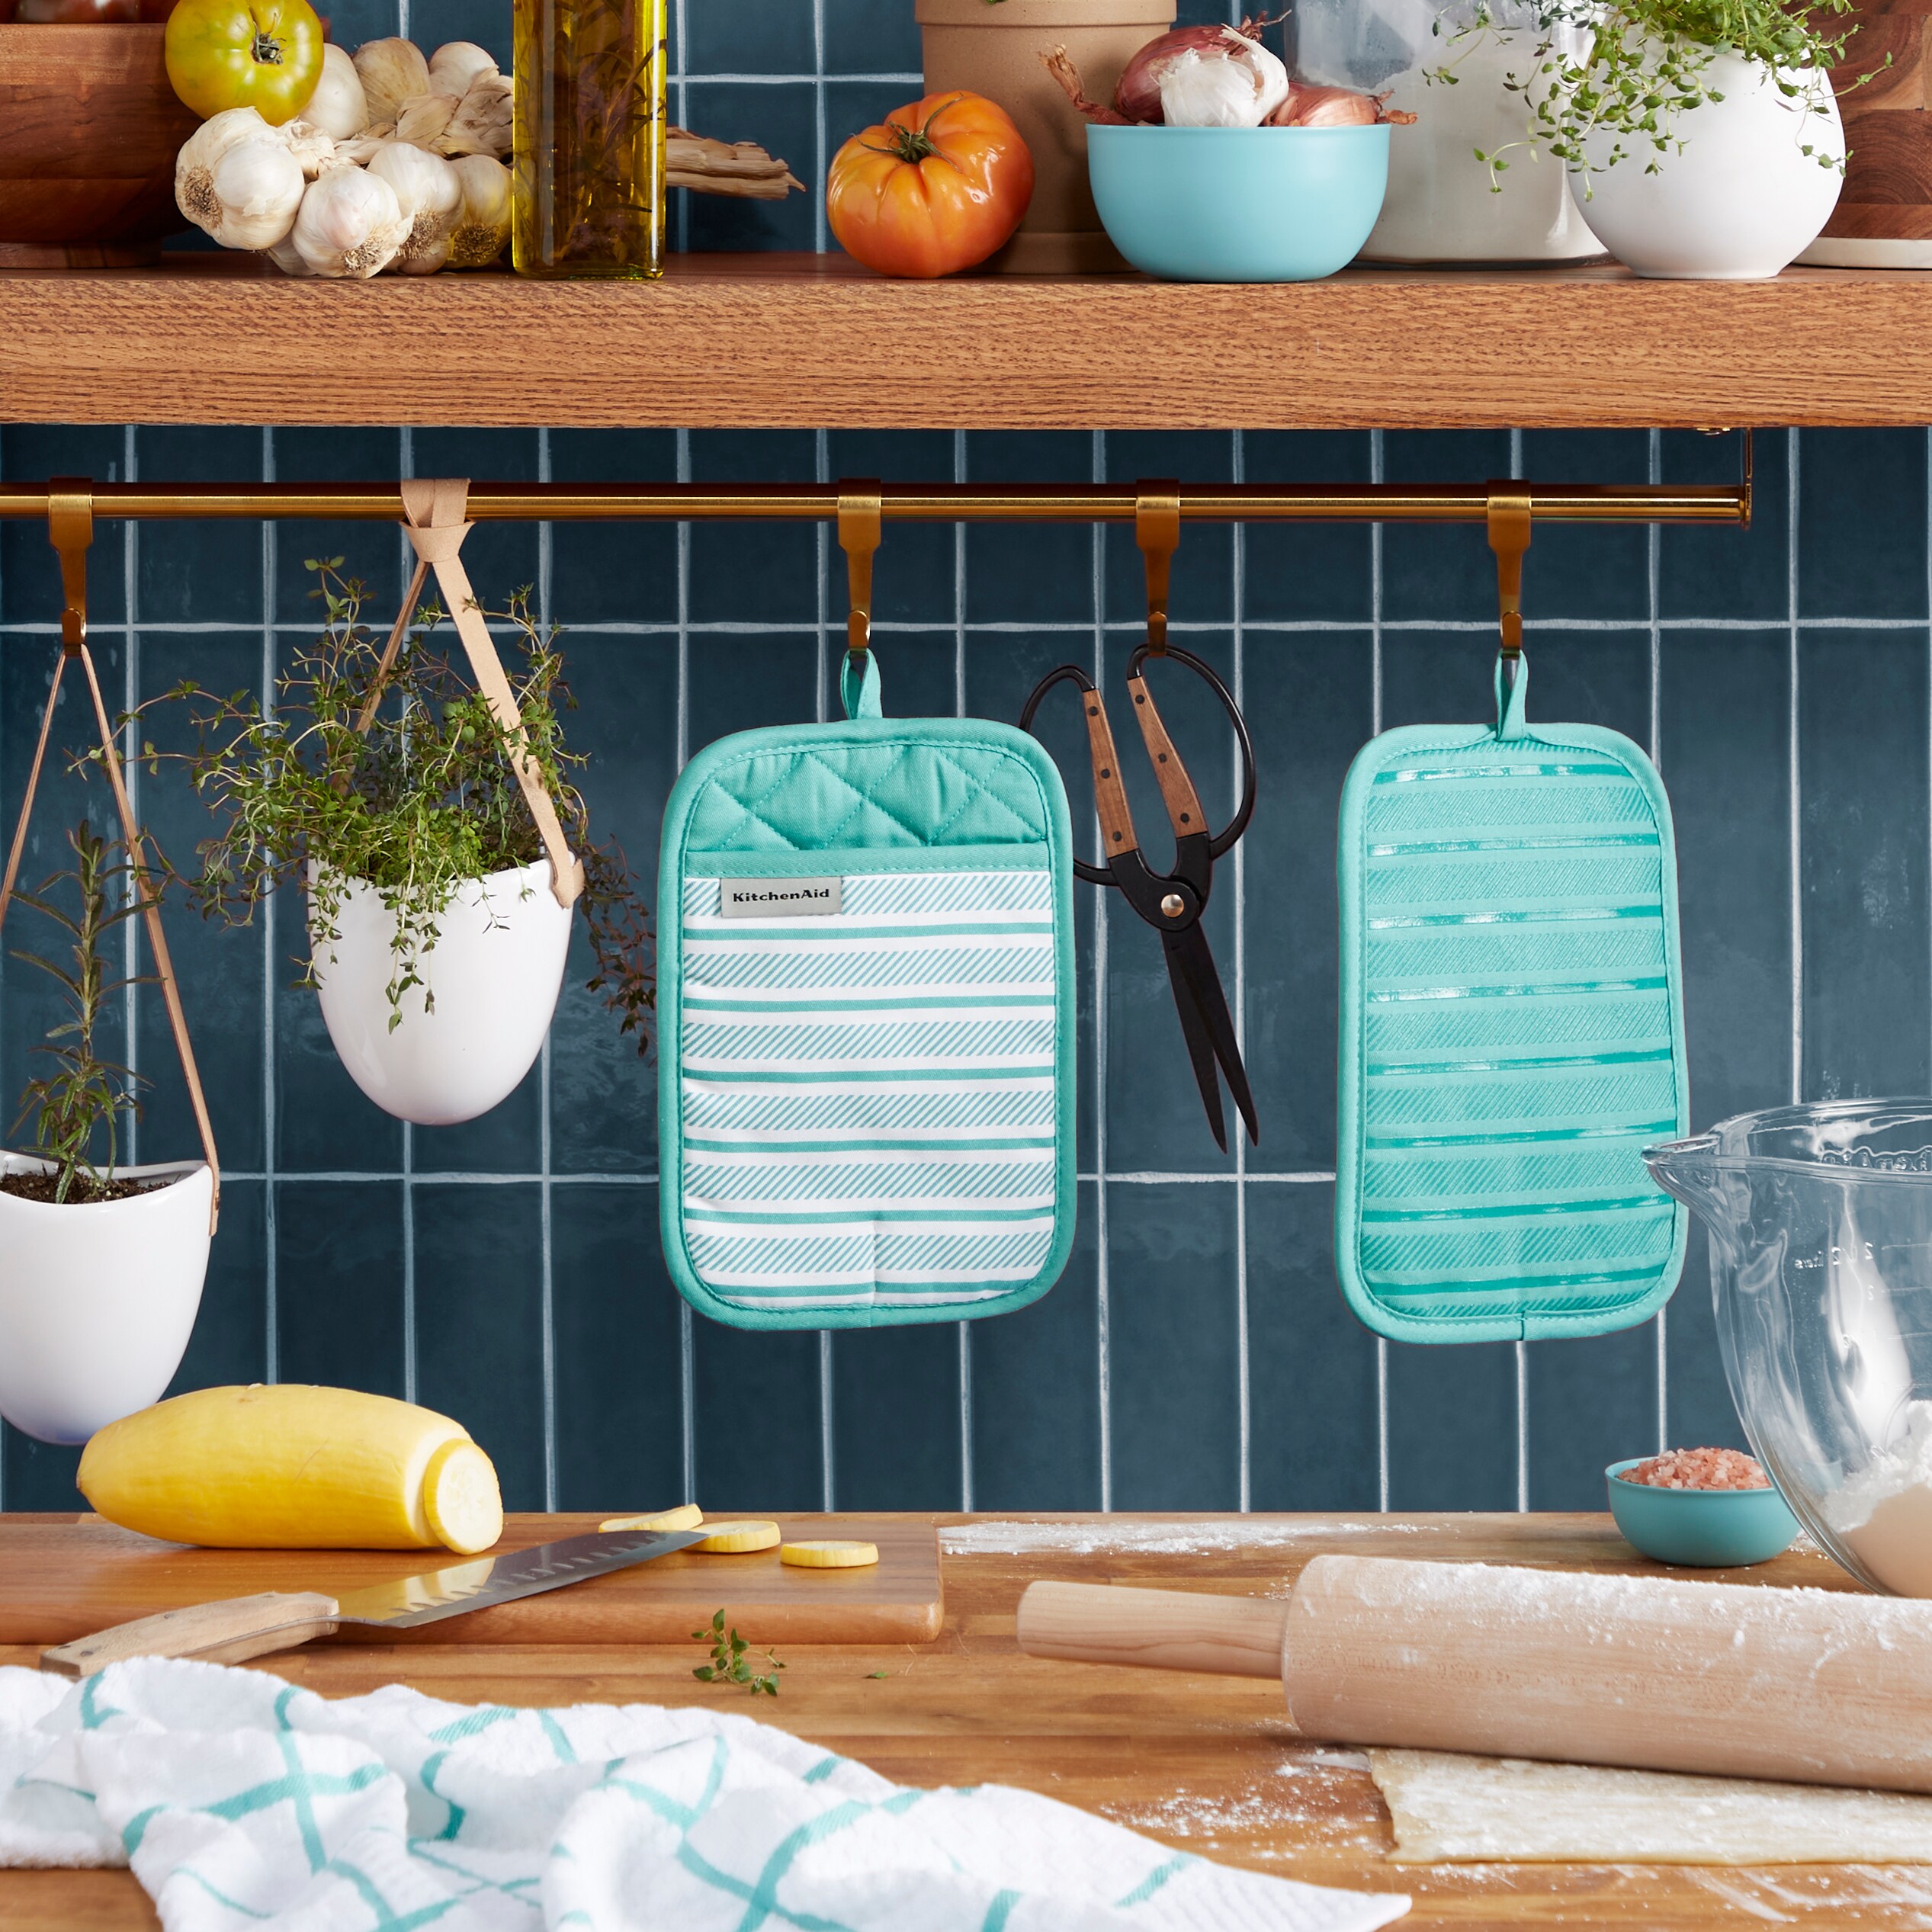 KitchenAid Albany Pot Holder Set - 2 Pack - Durable Heat Resistant Cotton -  Slip-Resistant - Aqua Sky Blue - 7x10 Inches - by Hastings Home in the  Kitchen Towels department at